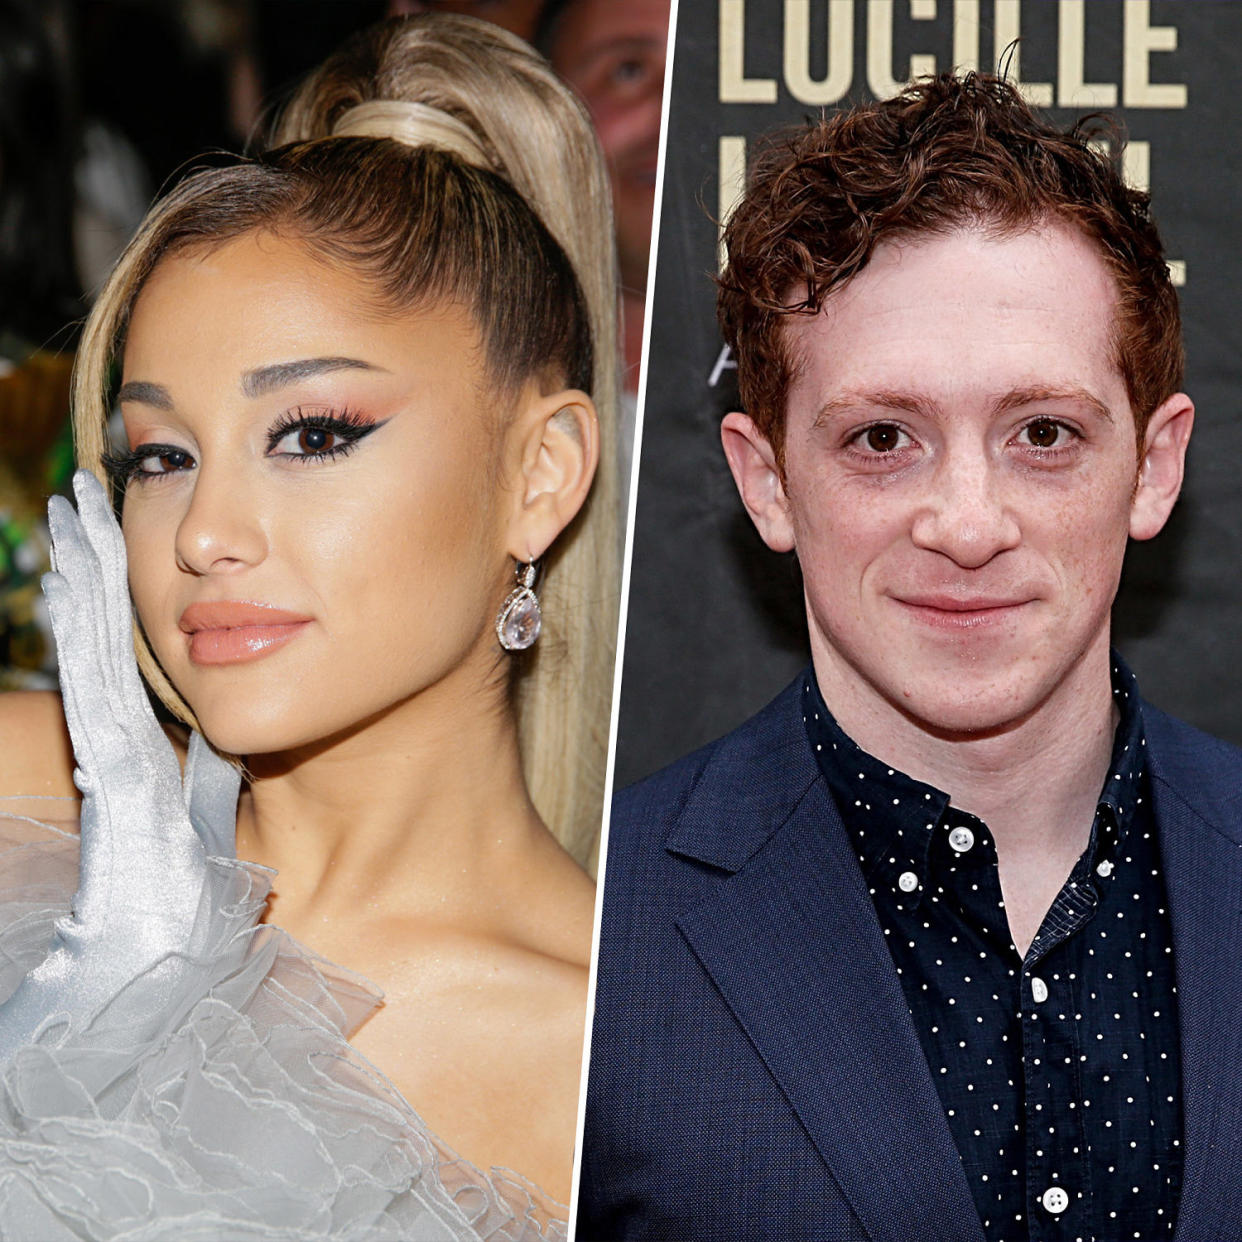 Ariana Grande and Ethan Slater. (Right: Monty Brinton/CBS via Getty Images / Left: Dominik Bindl/WireImage)